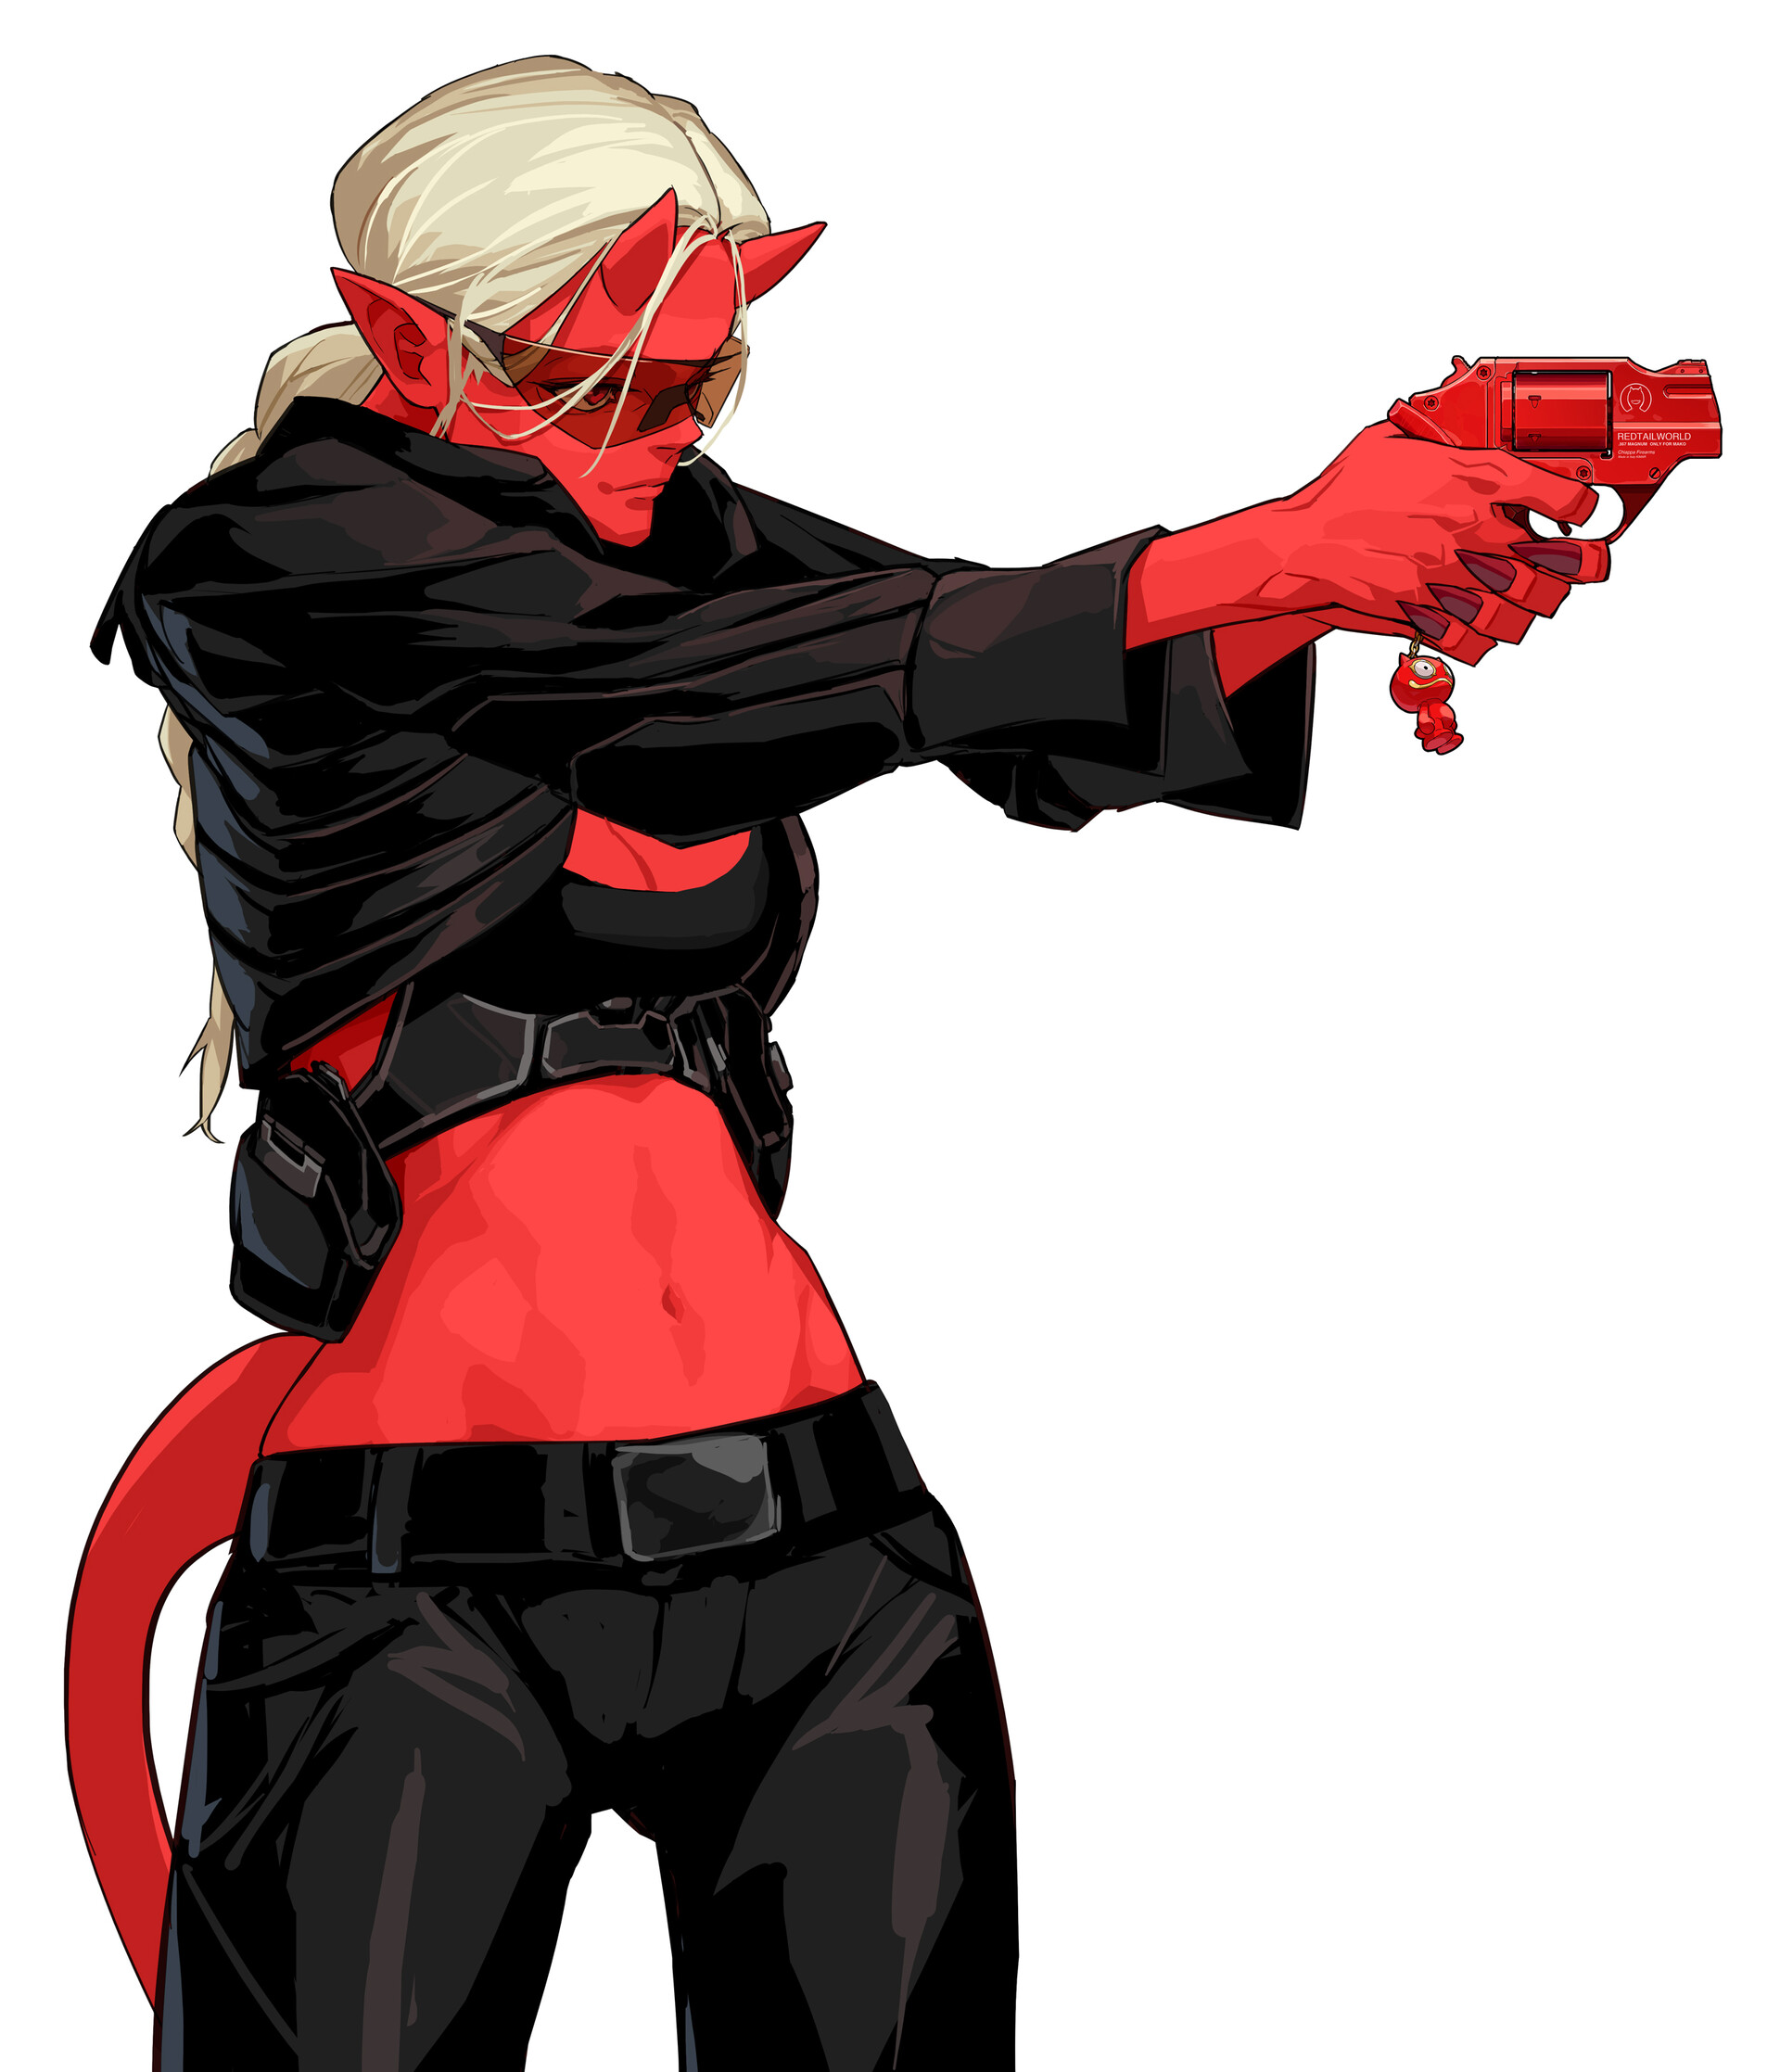 General 1920x2235 Yuho Kim women demon girls gun weapon girls with guns belly bra simple background white background horns blonde pointy ears tail aiming